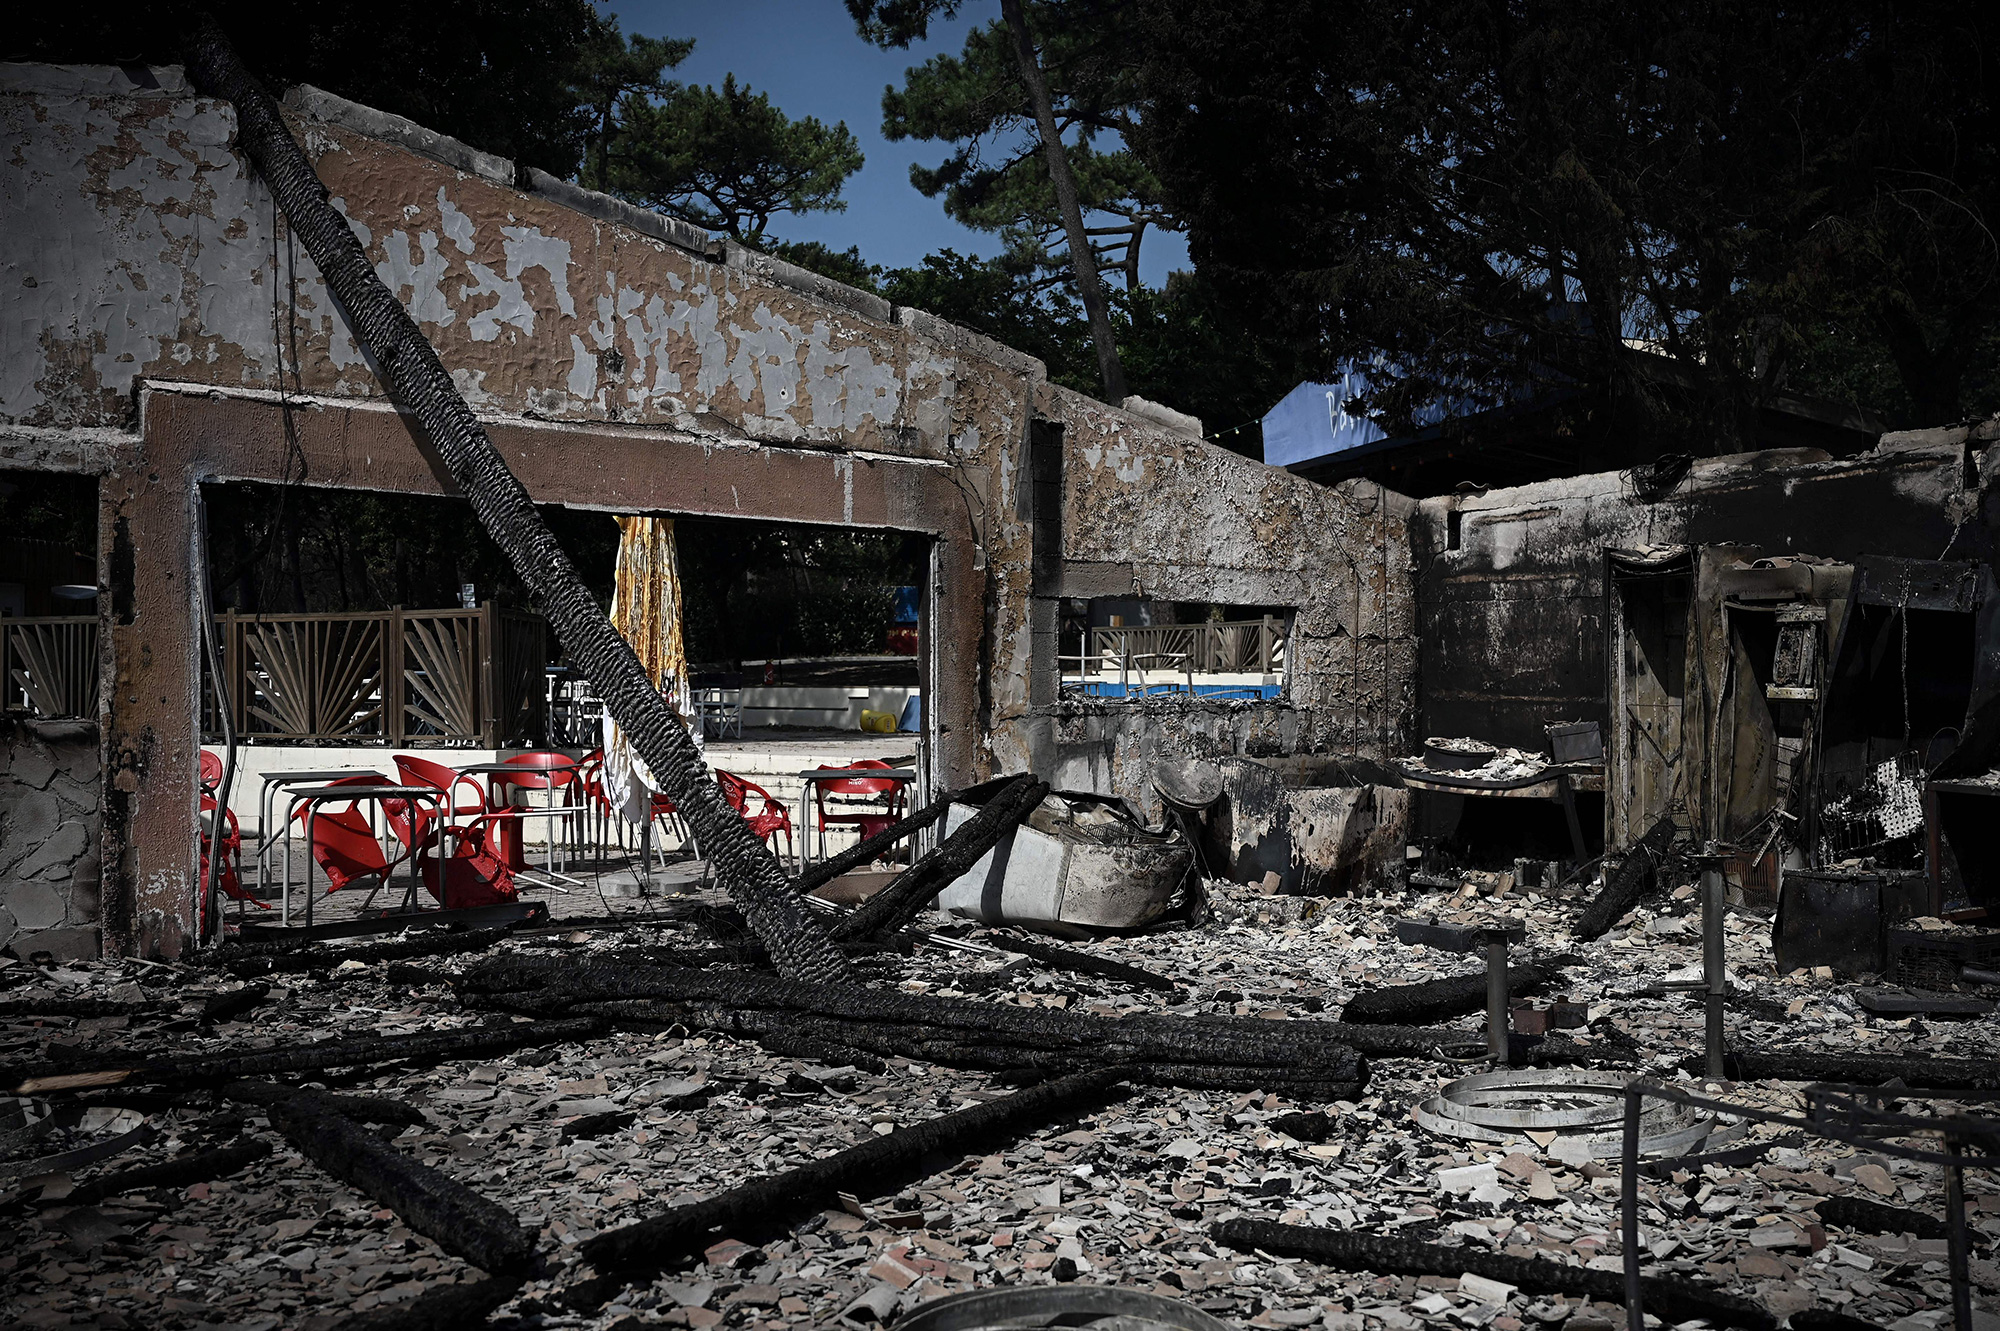 Damage at "Les Flots Bleus" camp on Tuesday, July 19, which has been ravaged by a wildfire in Pyla sur Mer in Gironde, located in the southwest of France. 